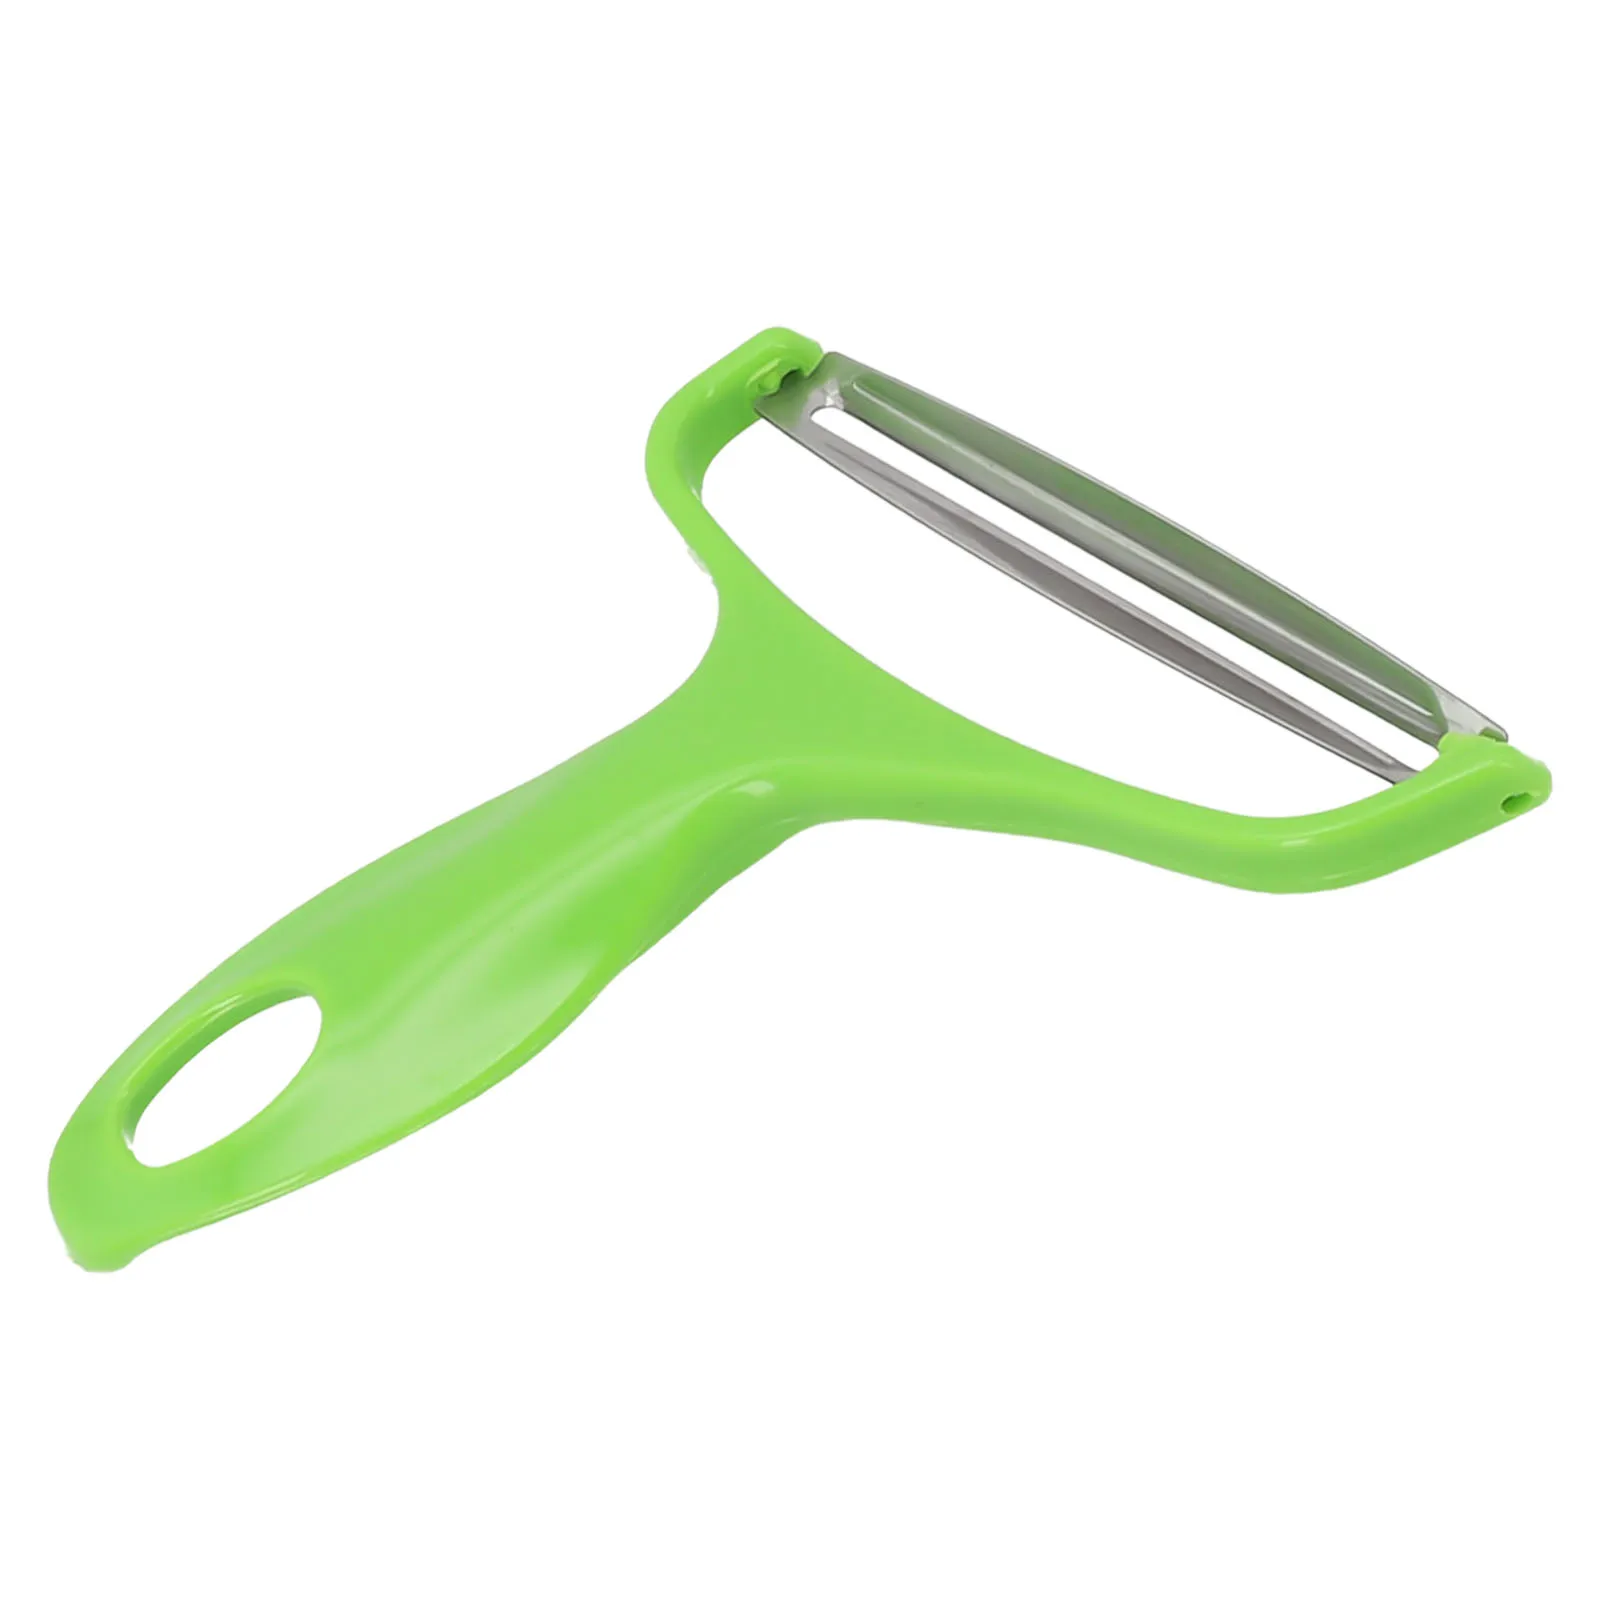 

New Stainless Stainless Steel Potato And Cabbage Peeler Grater Salad Multi-function Grater Easy To StoreClean And Store